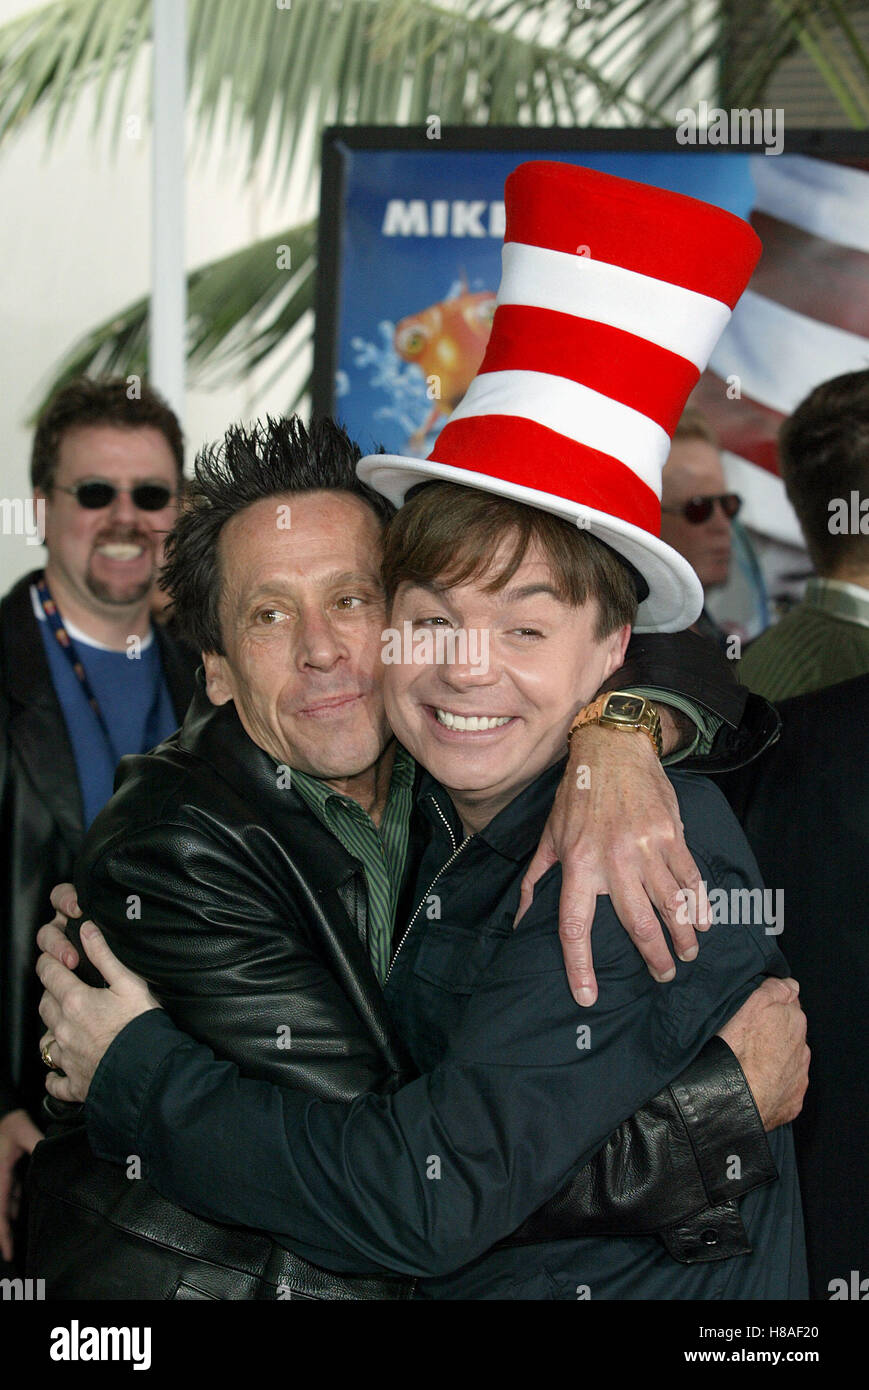 BRIAN GRAZER & MIKE MYERS DR. SEUSS' THE CAT IN THE HAT CITYWALK UNIVERSAL STUDIOS LA USA 09 November 2003 Stock Photo